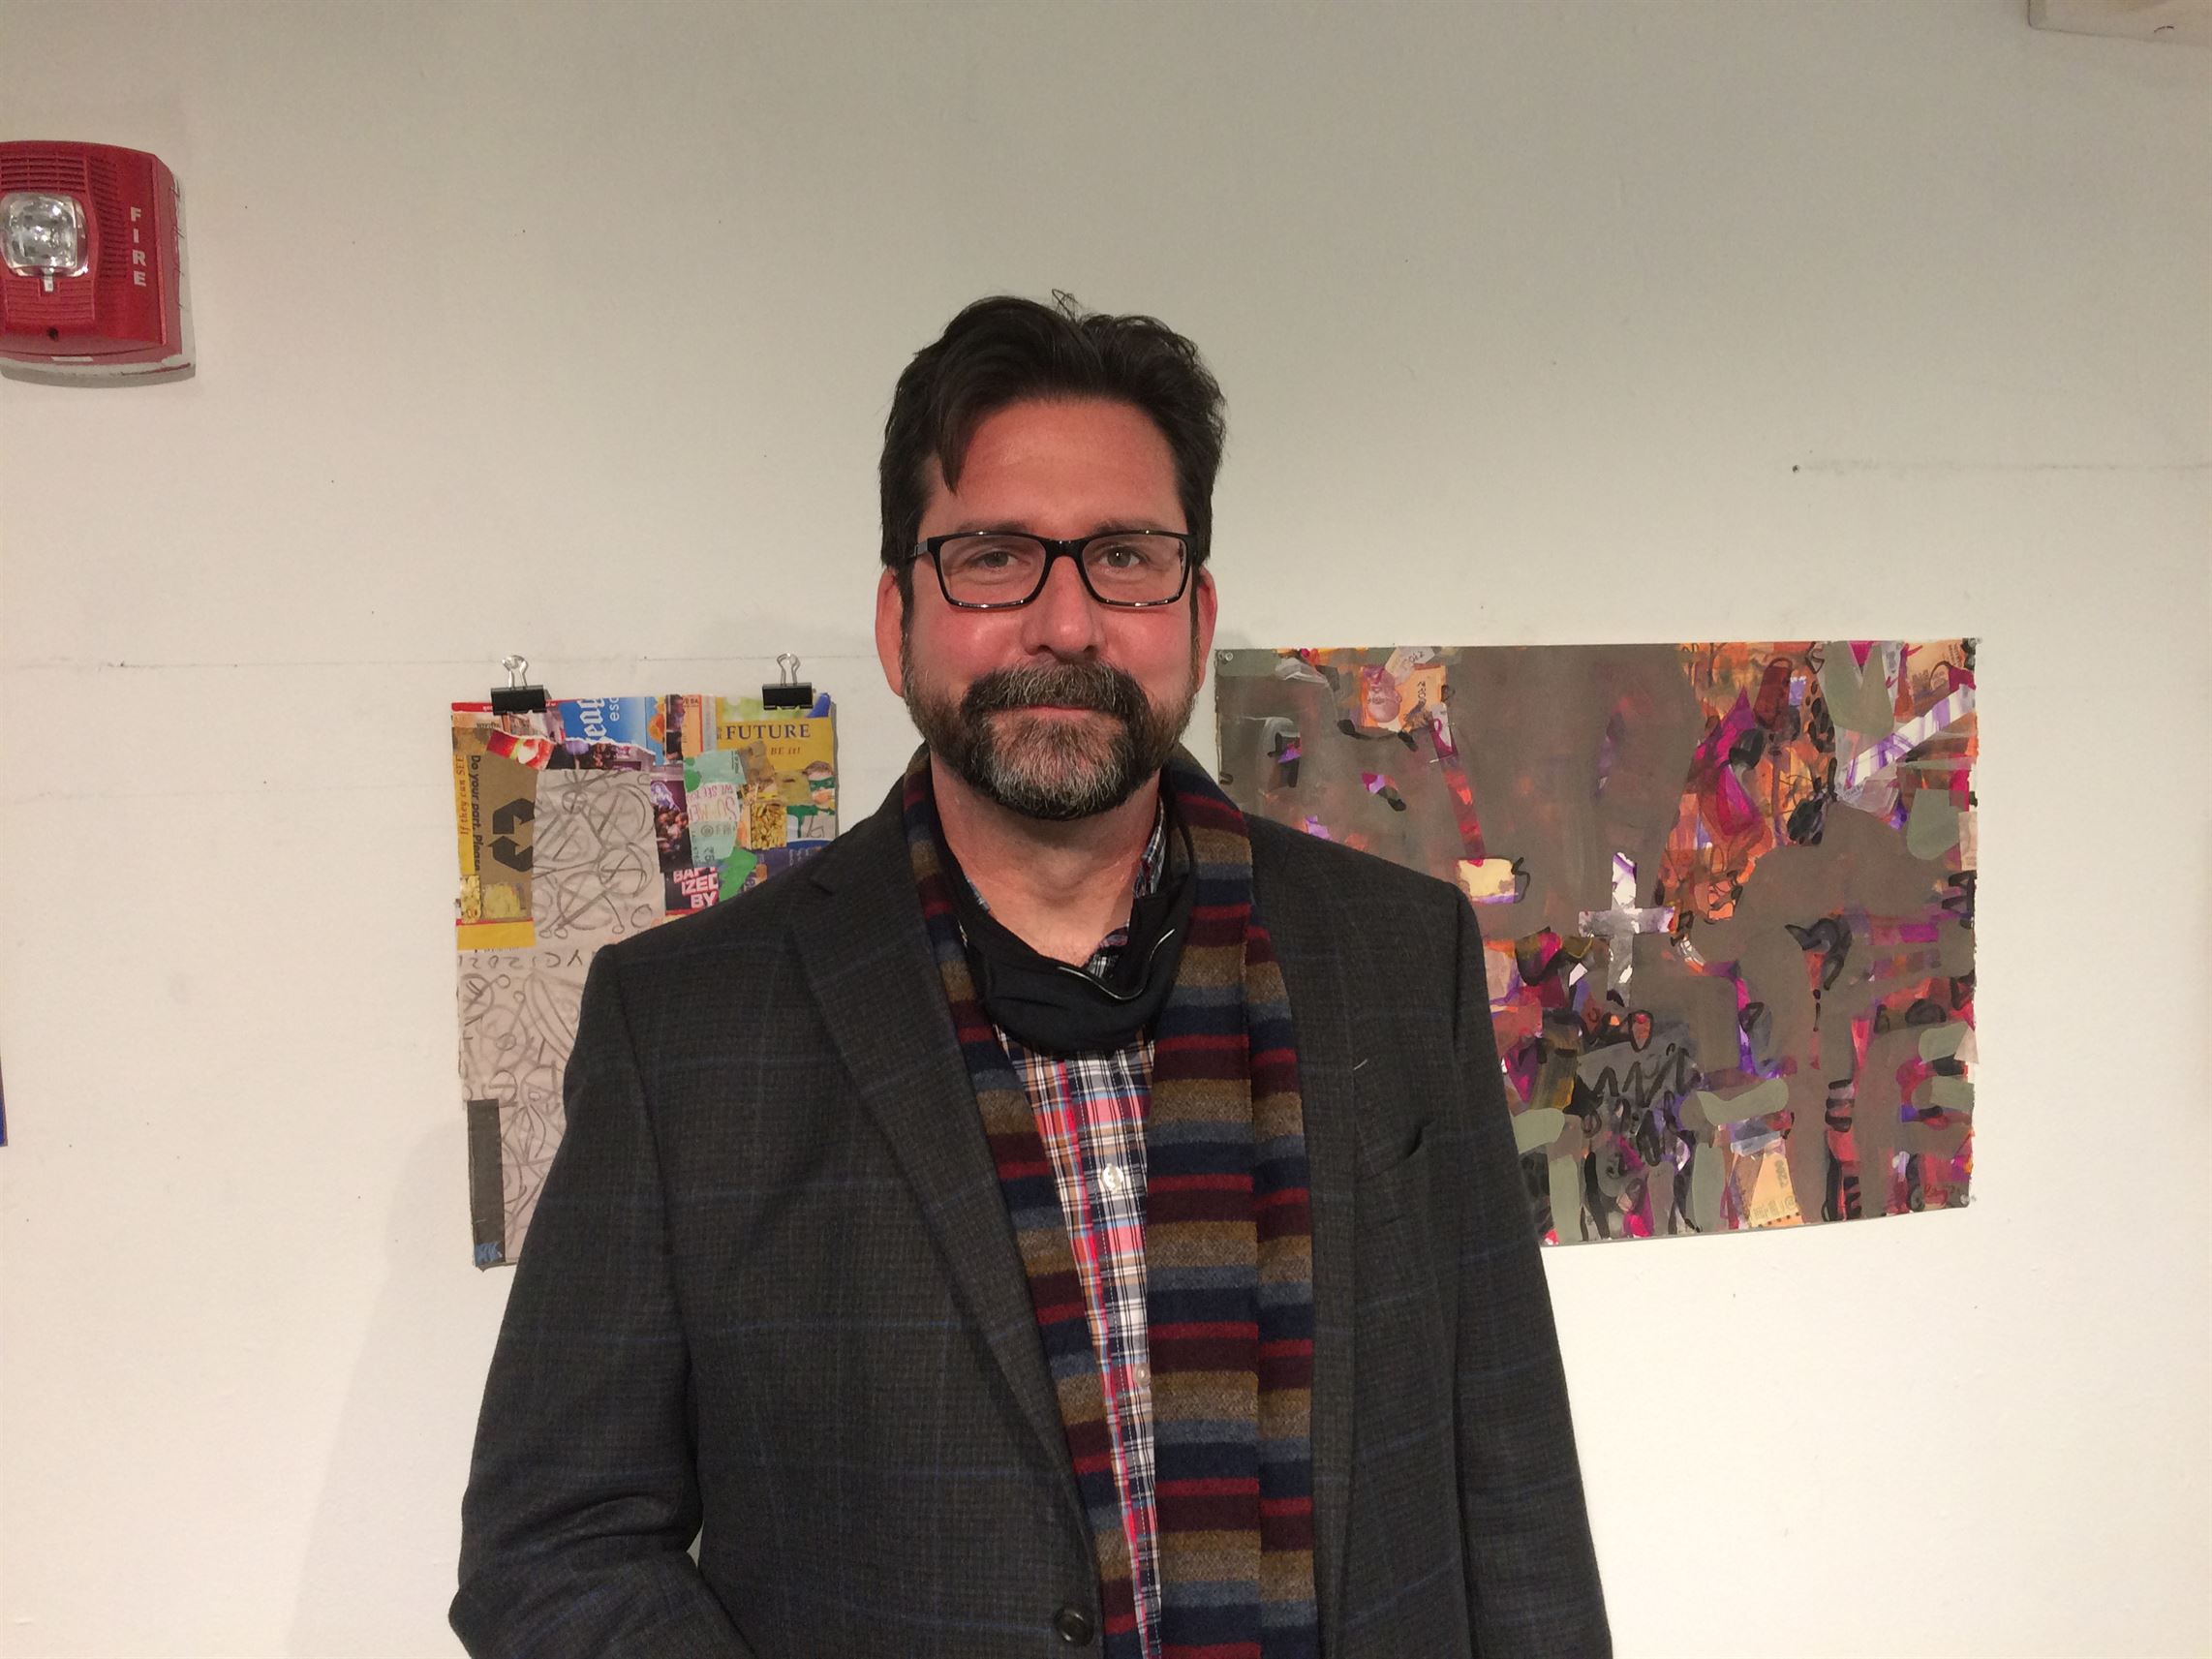 Christopher Kaczmarek, the program coordinator for visual arts, watched as Bhowmik made an impact with his art experiment. Sal DiMaggio | The Montclarion